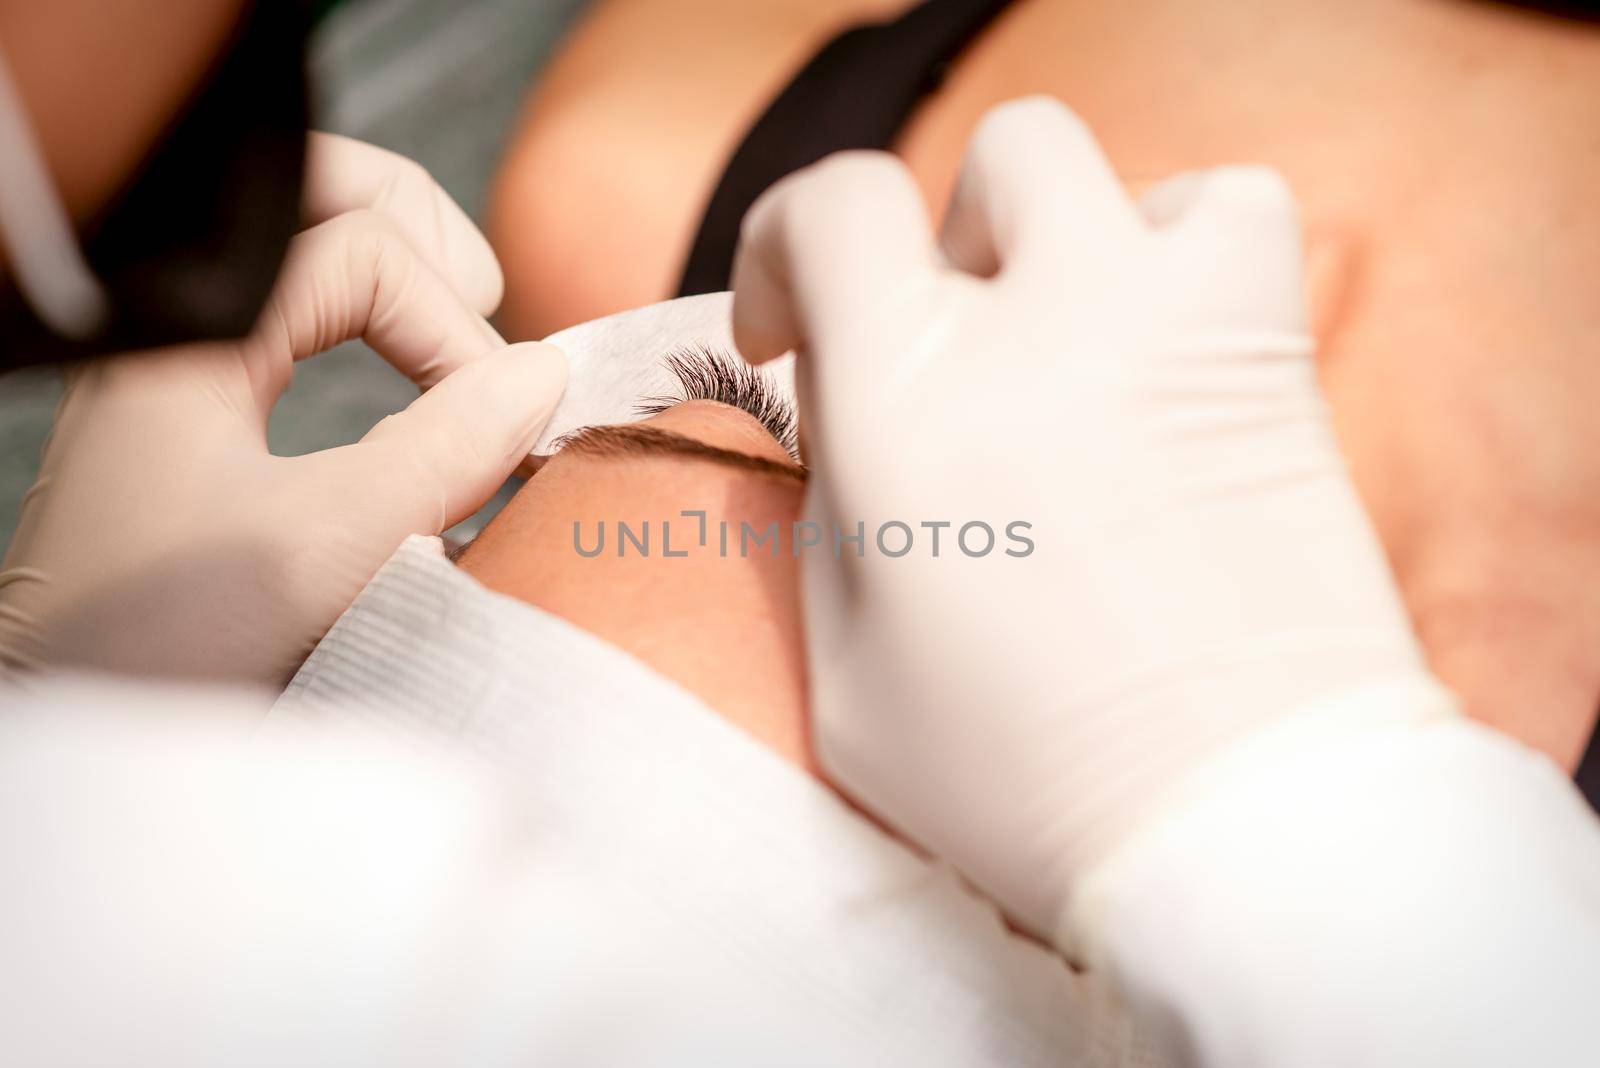 The hands of the cosmetologist are gluing white tape under the eye of the young caucasian woman during the eyelash extension procedure, closeup. by okskukuruza